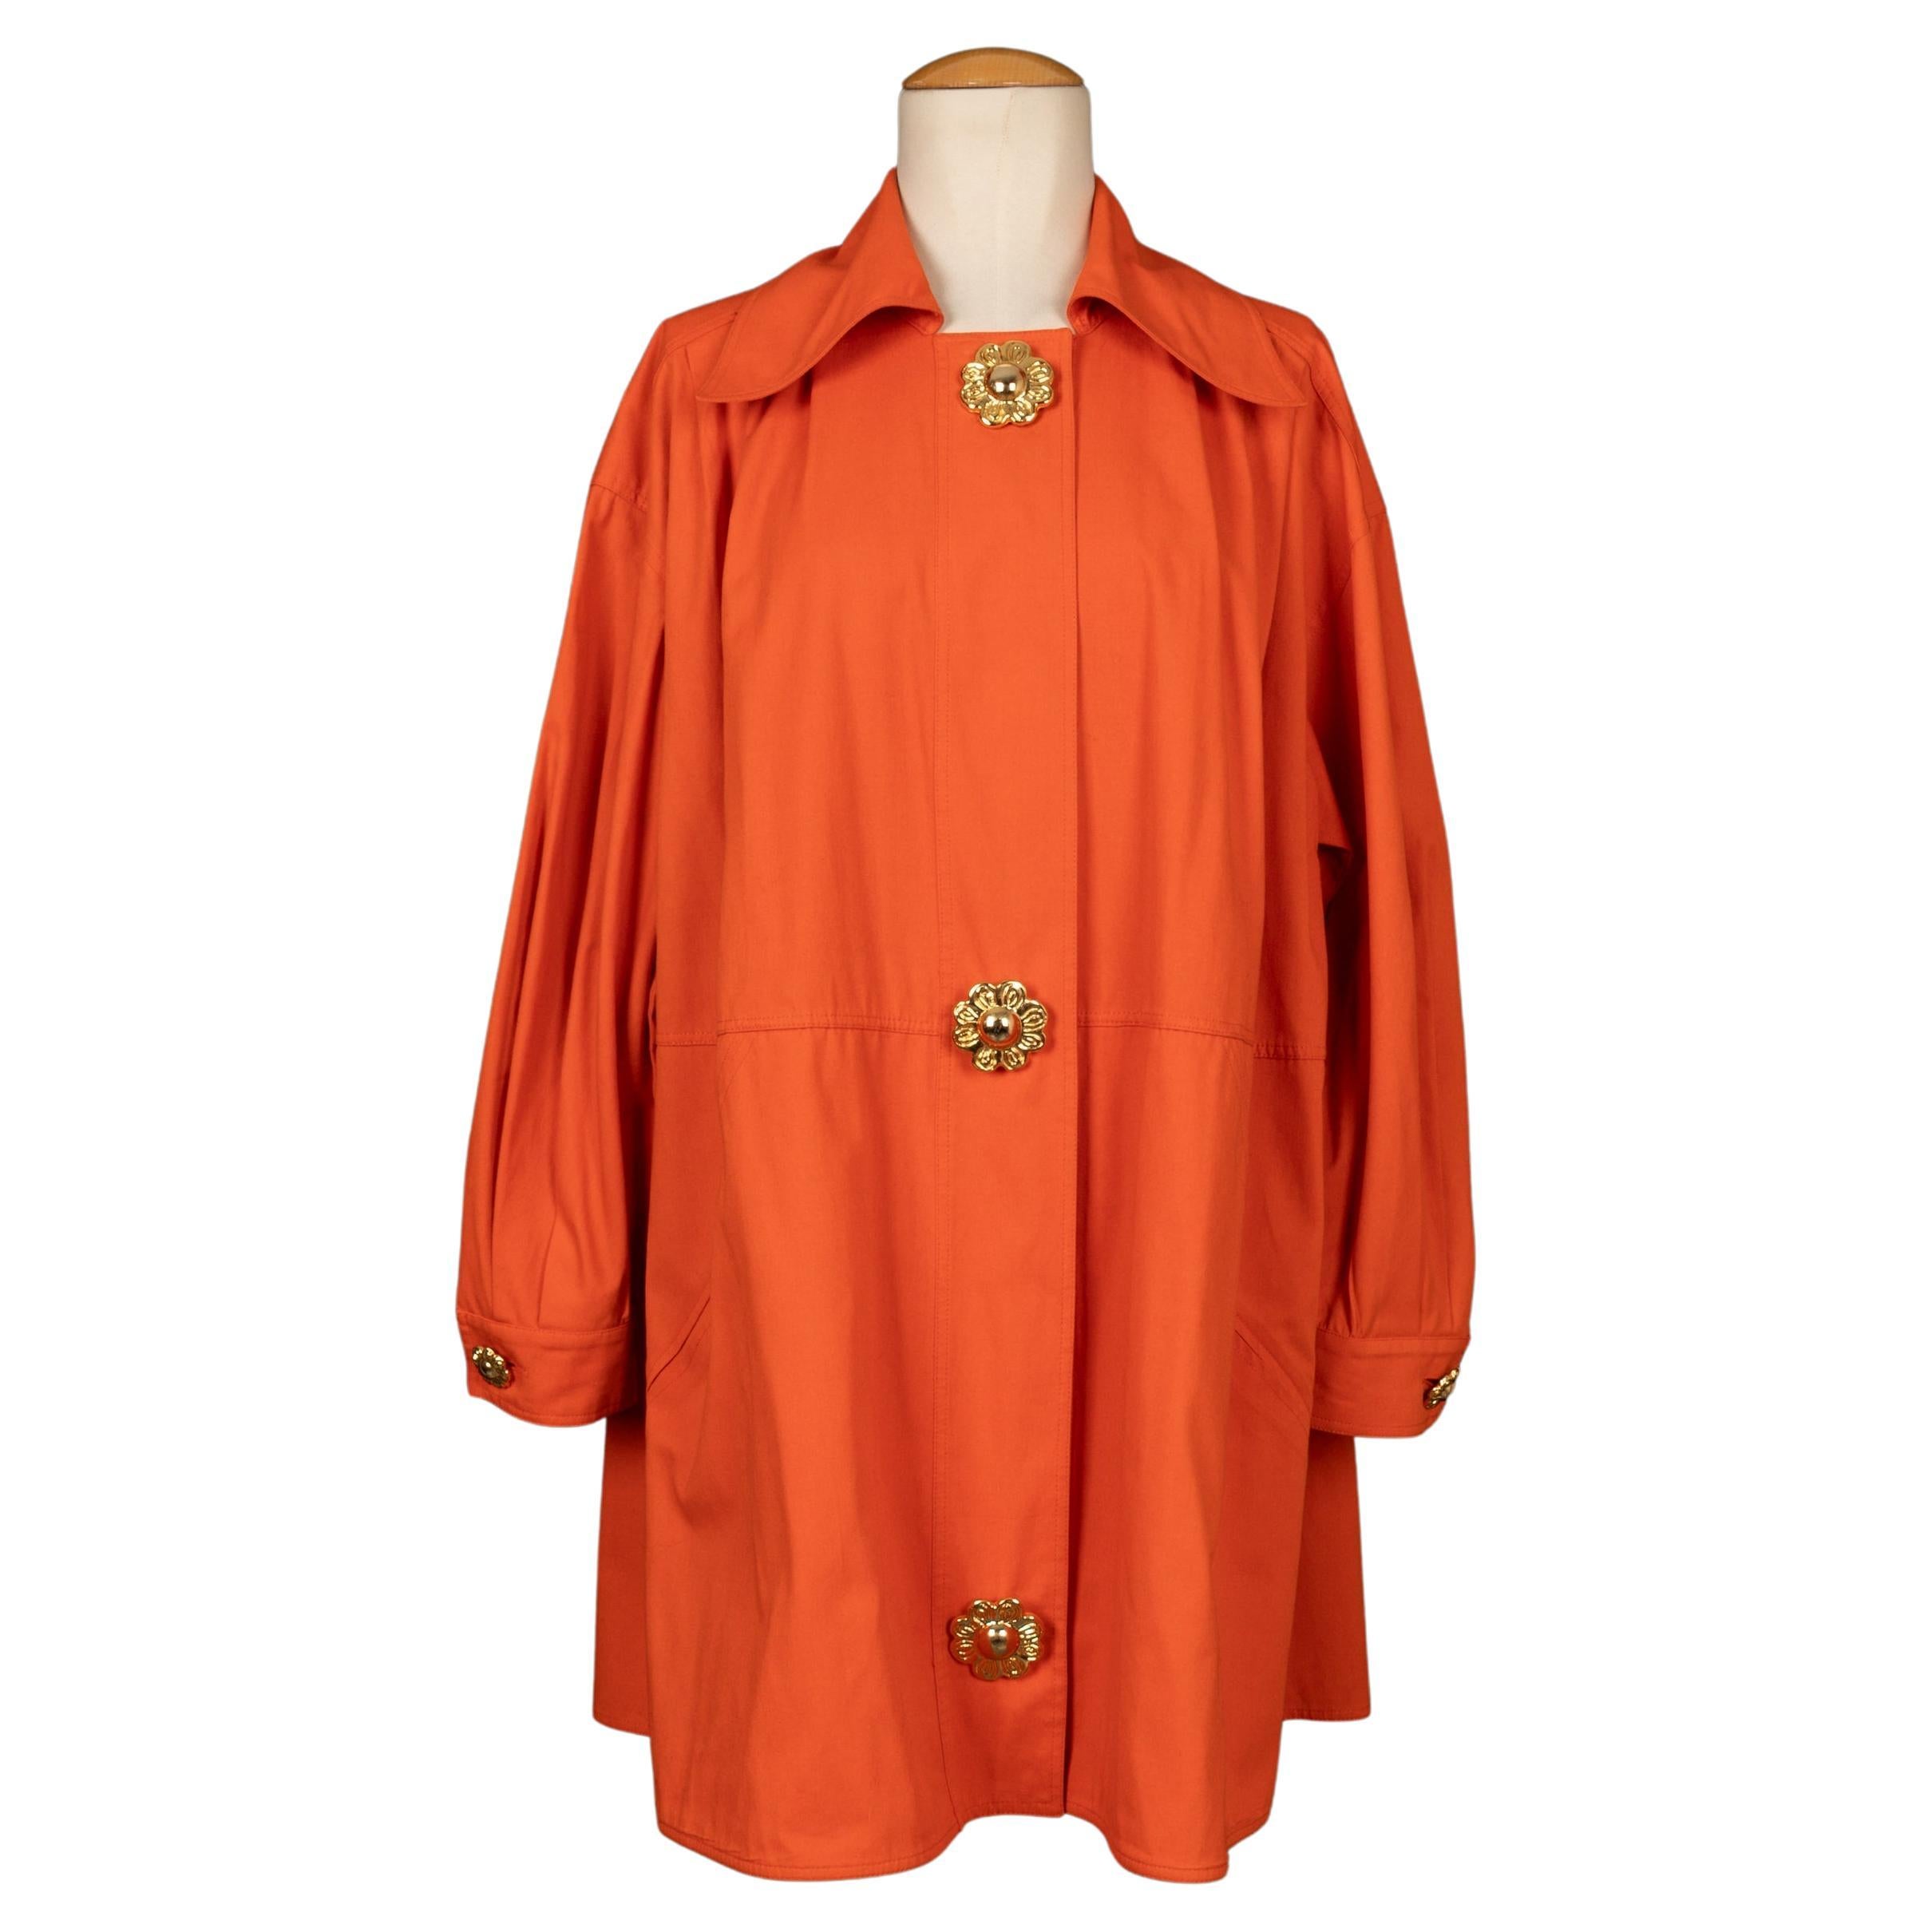 Christian Lacroix Orange Cotton Coat Ornamented with Golden Metal Buttons For Sale